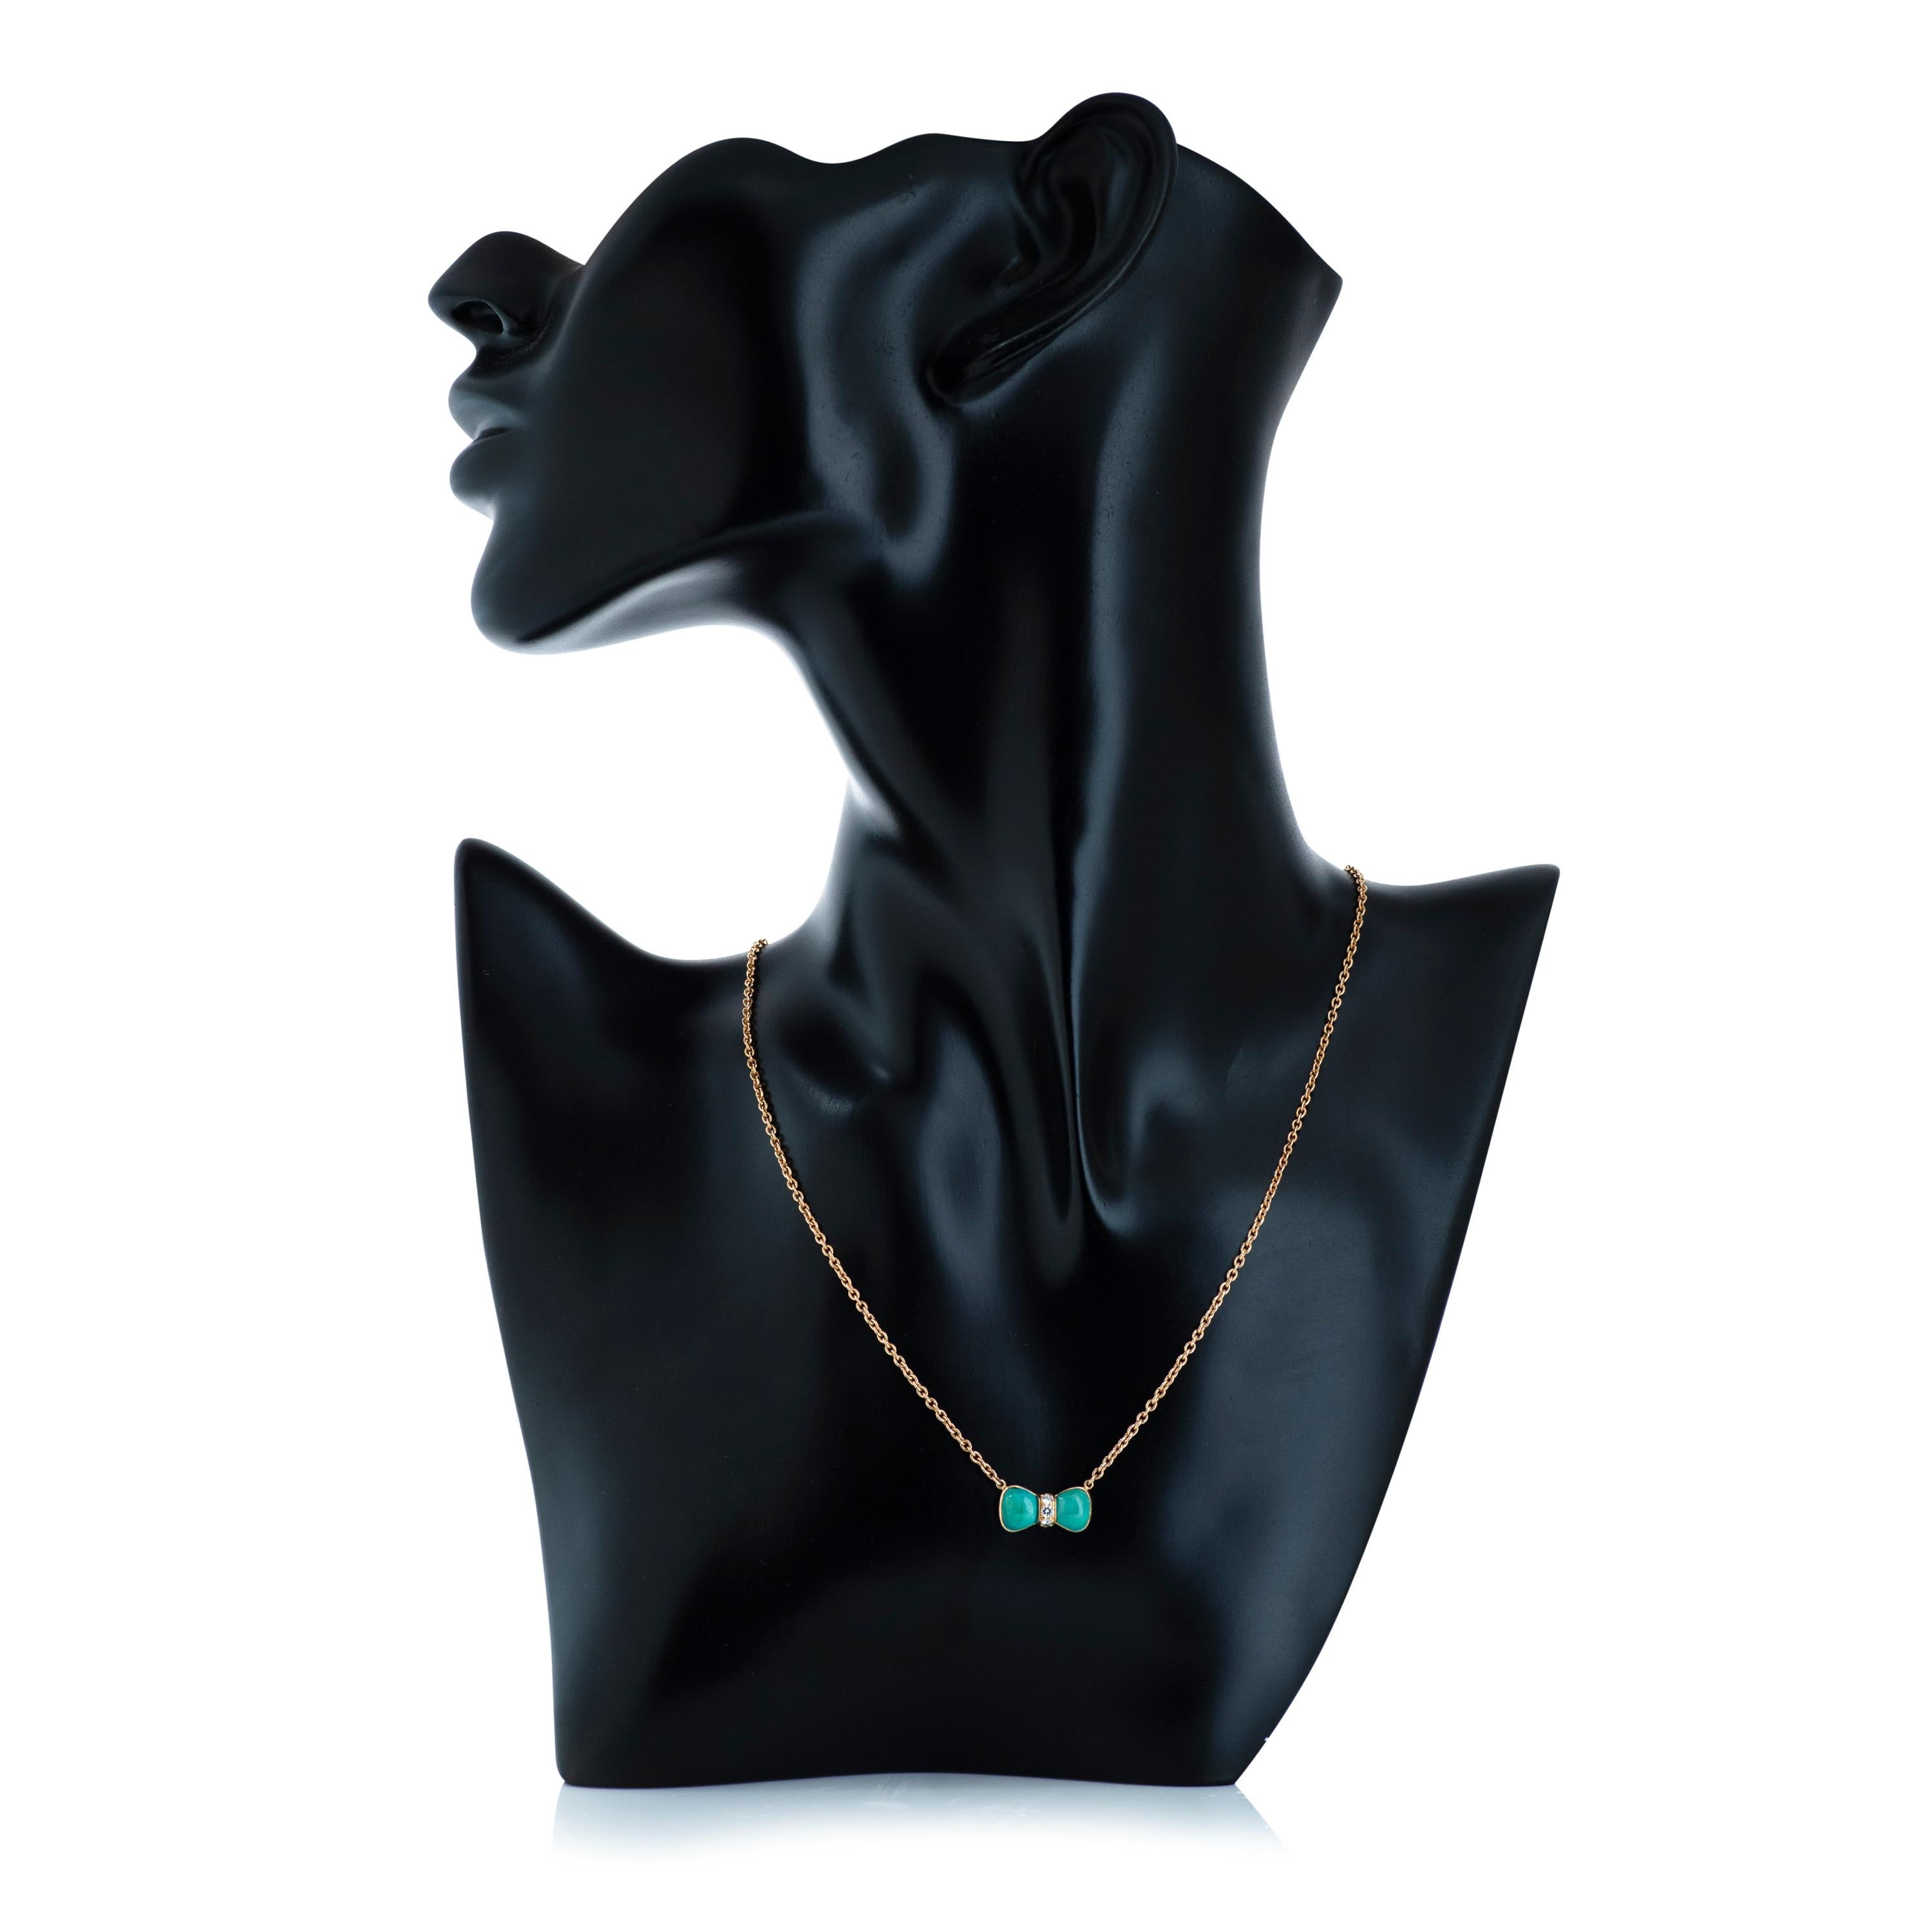 Van Cleef & Arpels turquoise and diamond bow pendant necklace.

This necklace features 2 cabochon turquoise accented by 3 round brilliant cut diamonds totaling approximately 0.12 carats with F-G color and VS clarity.

The necklace is 16